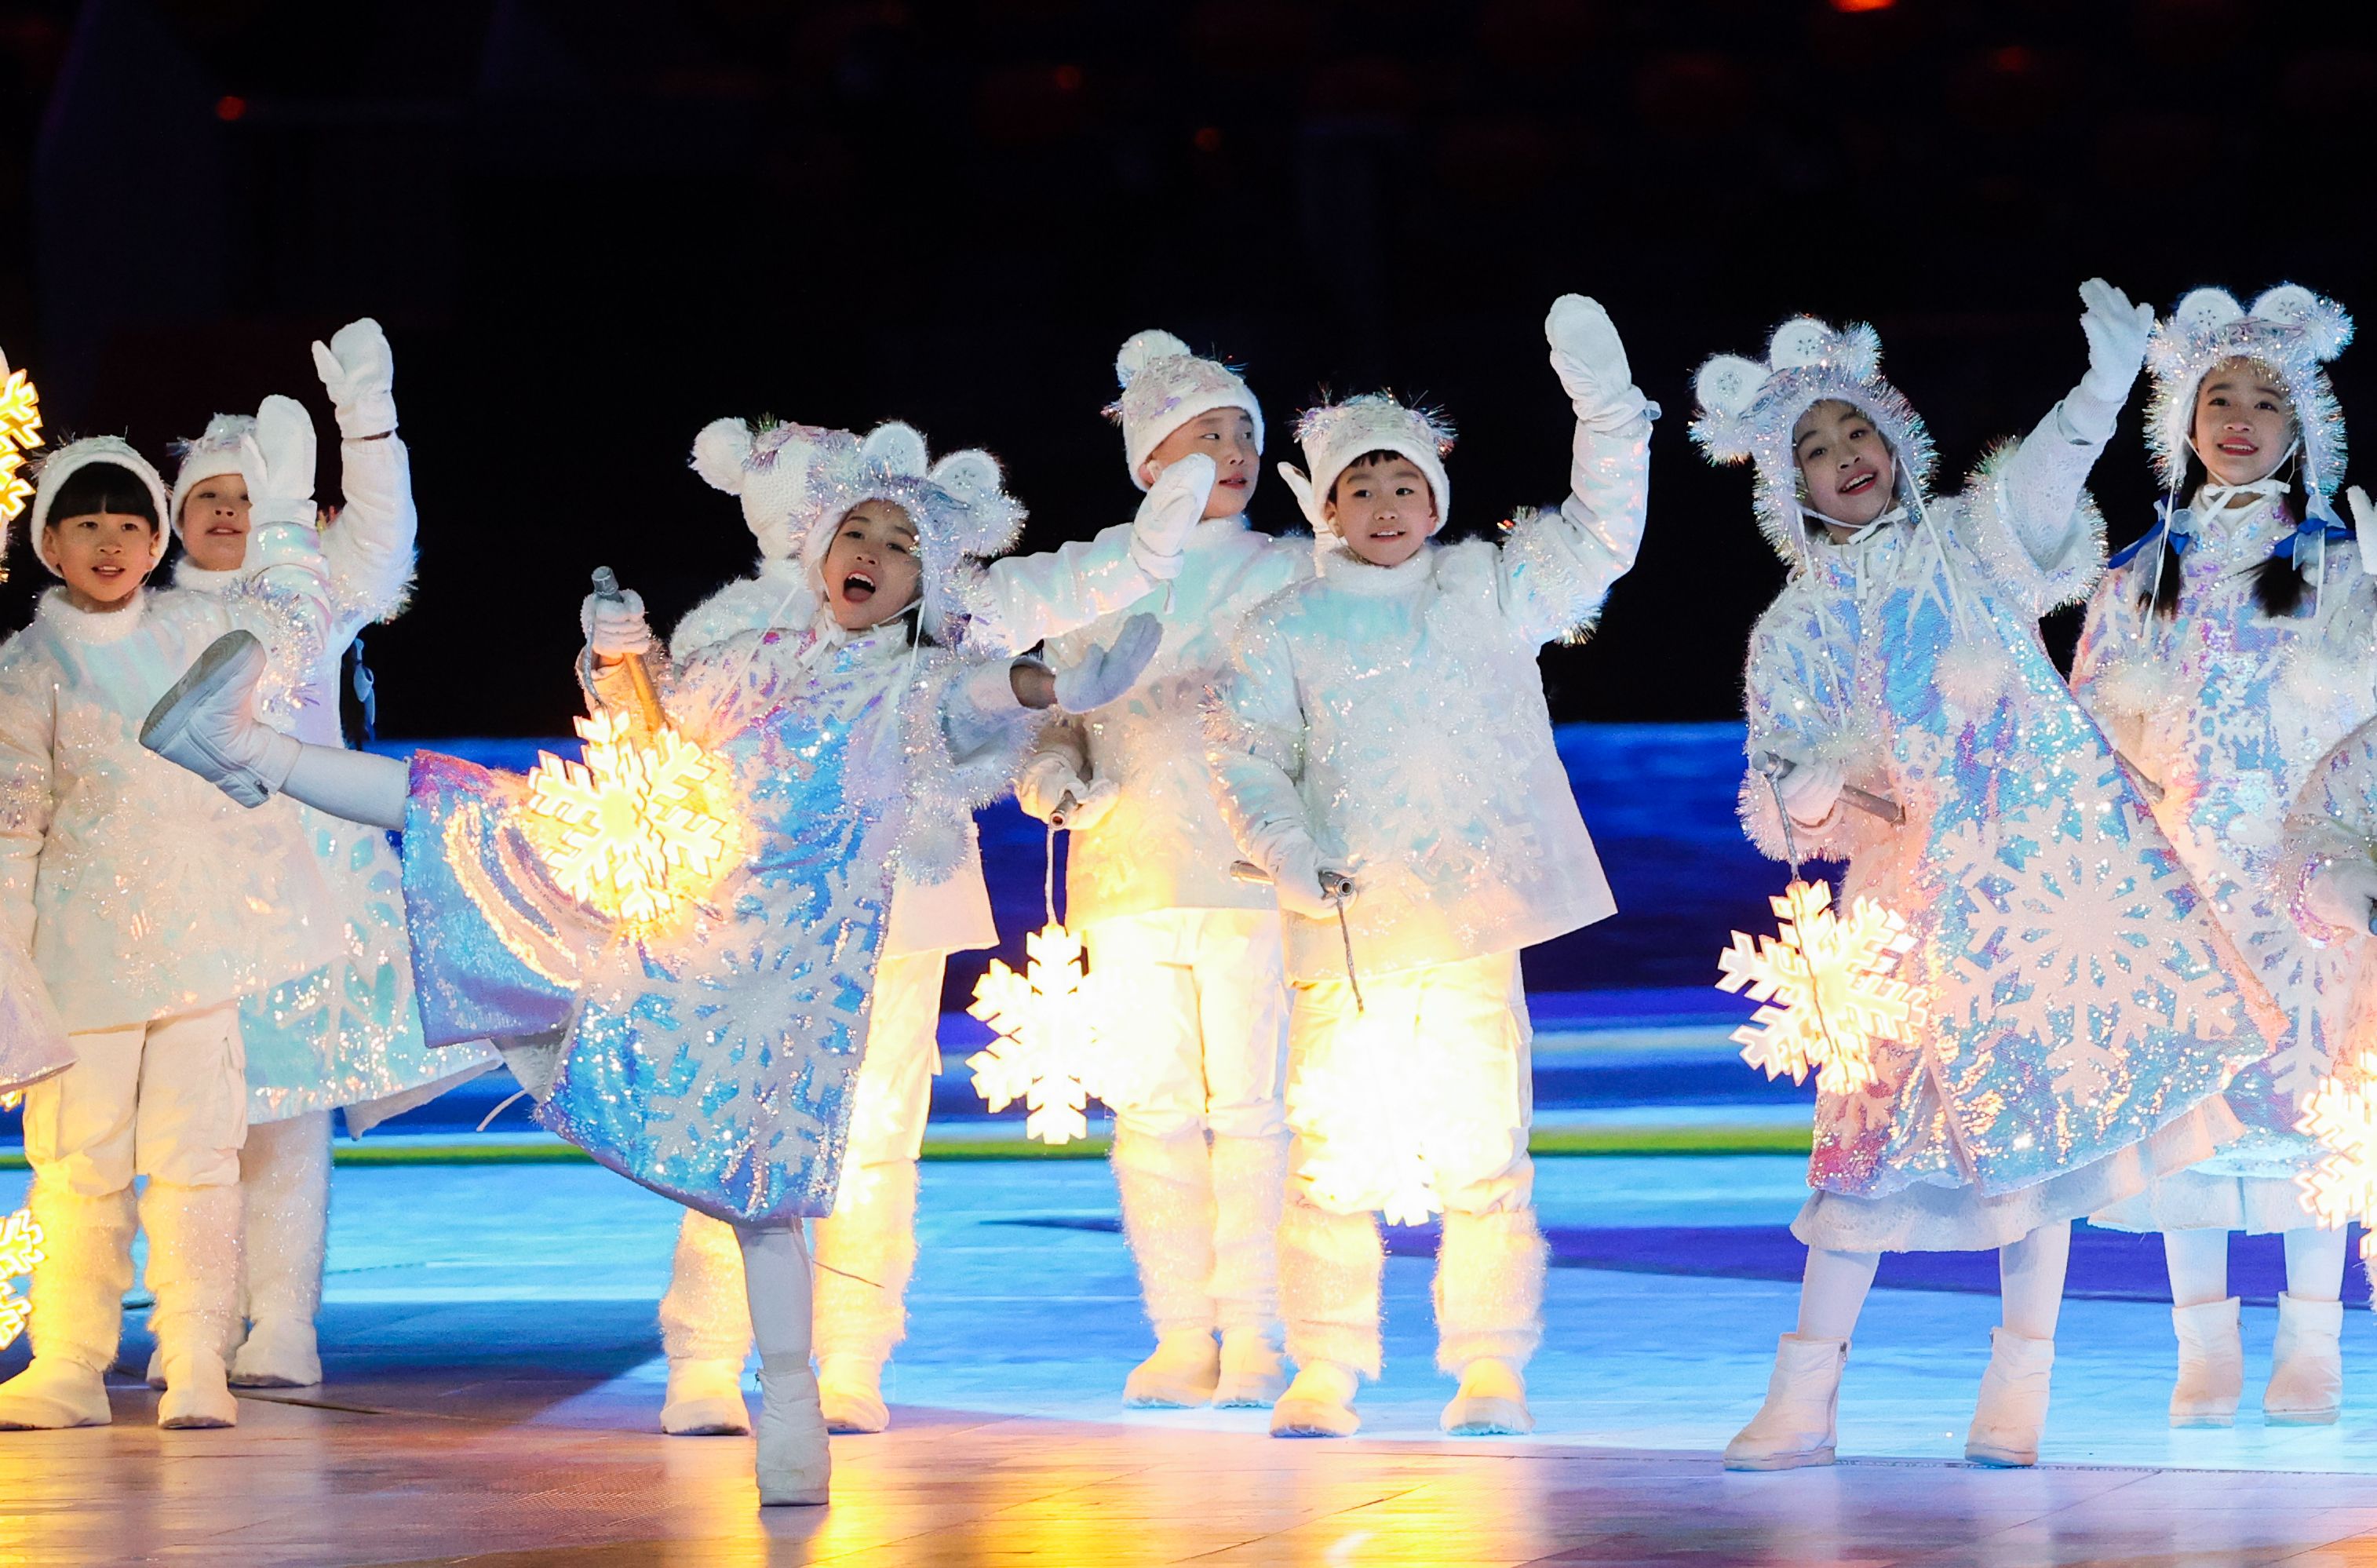 Children holding lit snowflake figures perform at the closing ceremony of the beijing games